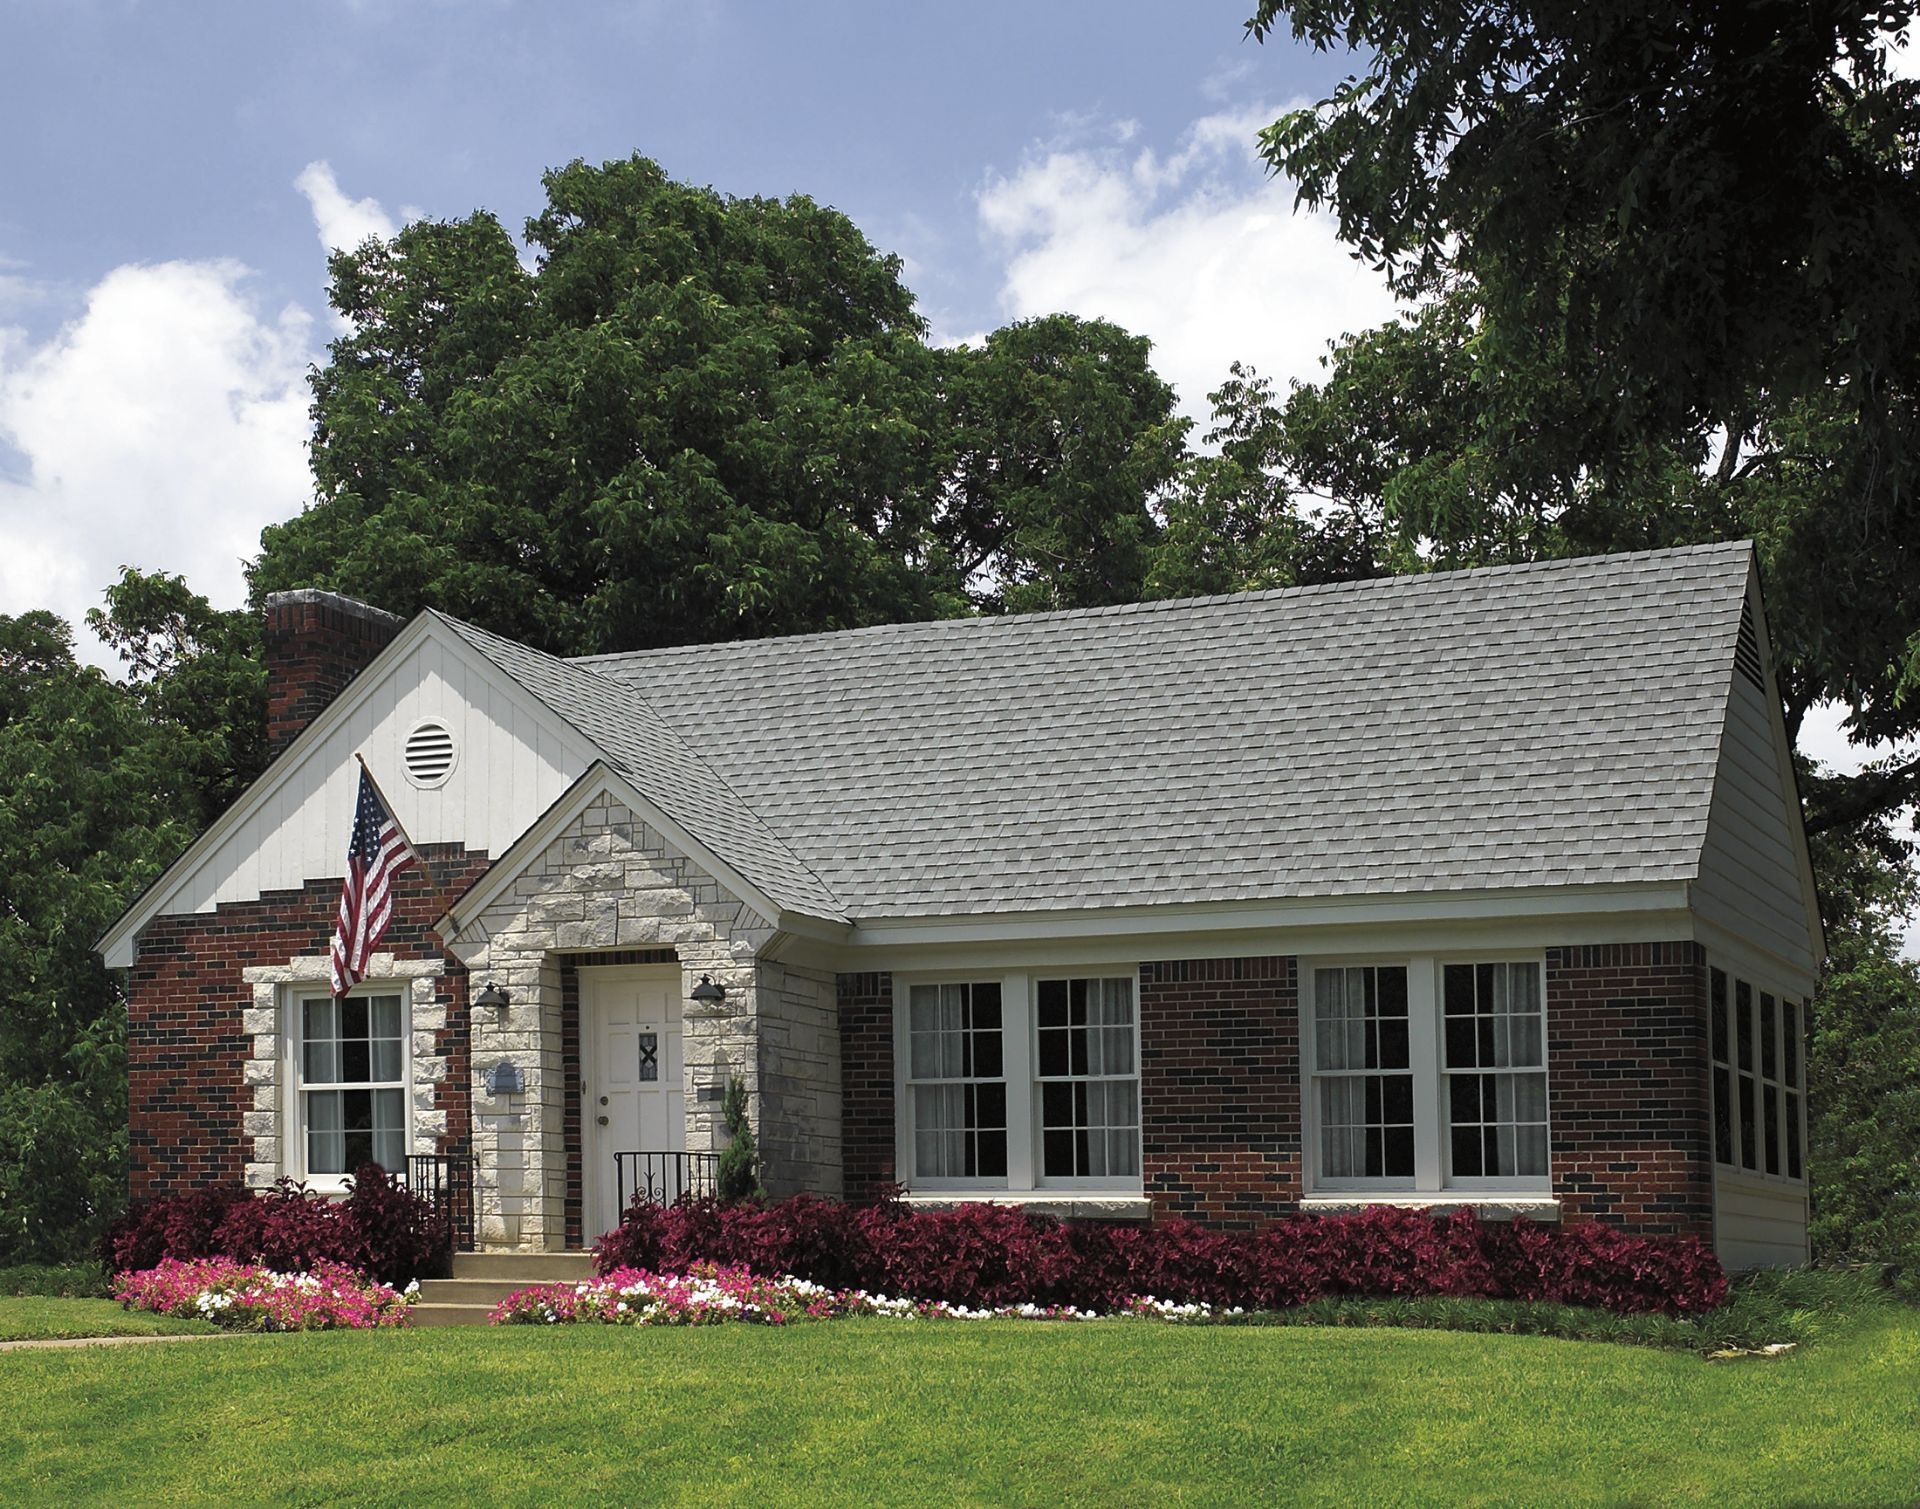 A residential home with attractive roof.